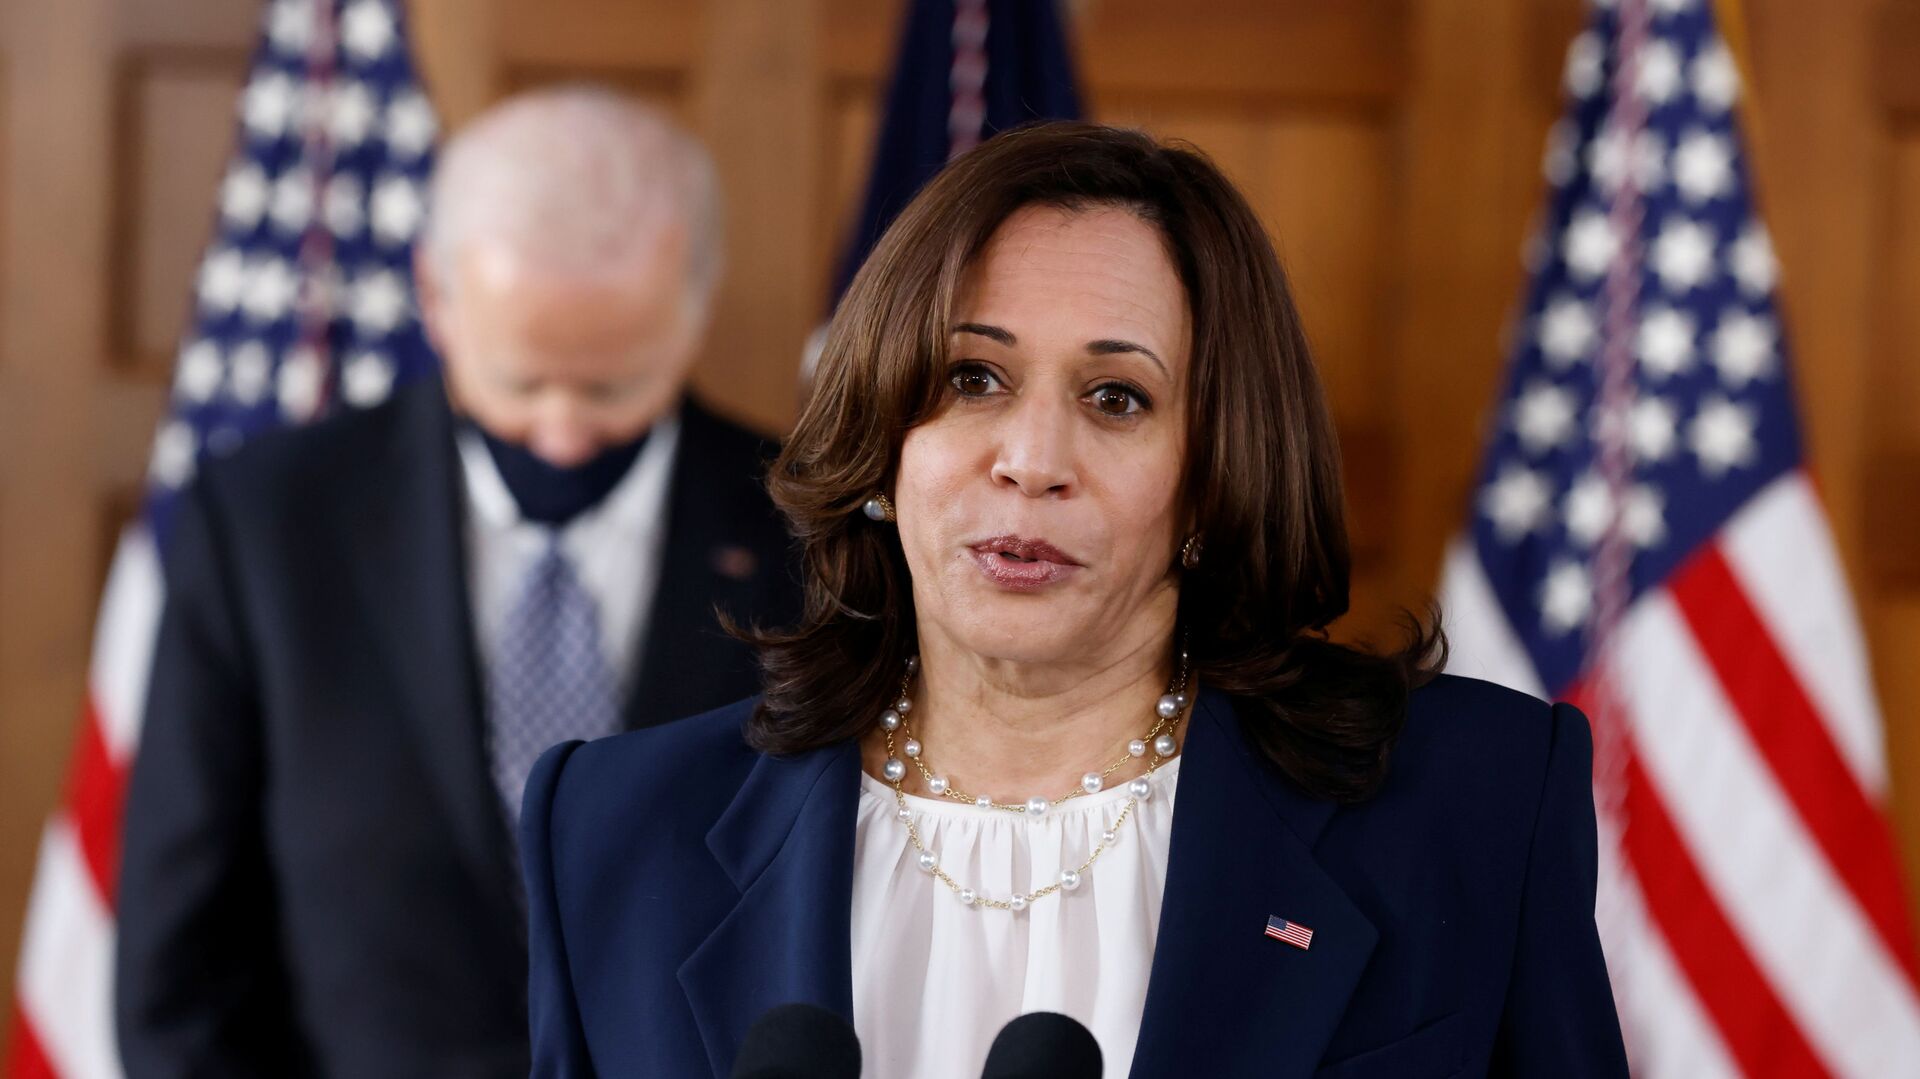 U.S. President Joe Biden and Vice President Kamala Harris deliver remarks after a meeting with Asian-American leaders to discuss the ongoing attacks and threats against the community, during a stop at Emory University in Atlanta, Georgia, U.S., March 19, 2021 - Sputnik International, 1920, 21.03.2022